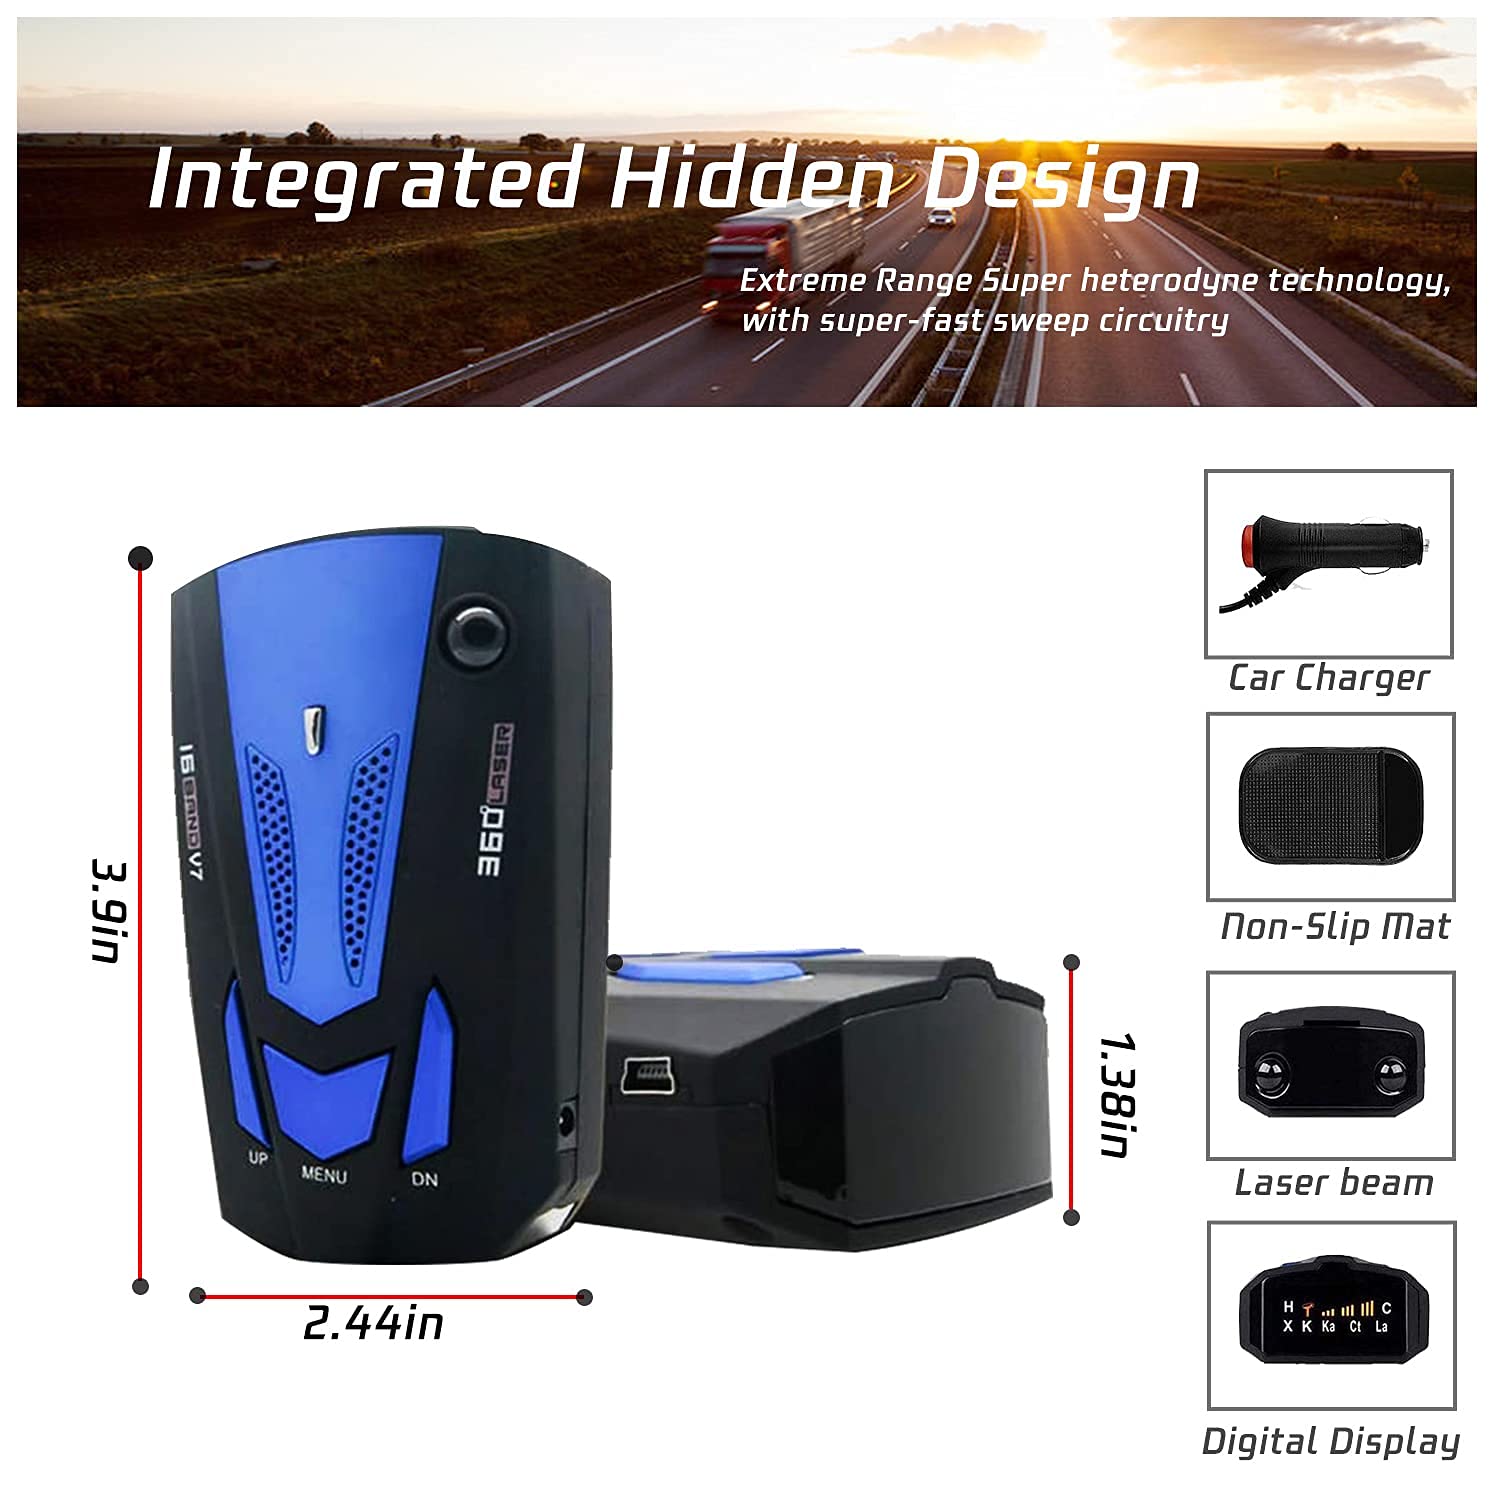 New Car Radar Detector, City and Highway Mode, 360 Degree Detection, Voice Alert Speed, Built-in GPS, LED Display, Christmas and Thanksgiving Gift (Blue)